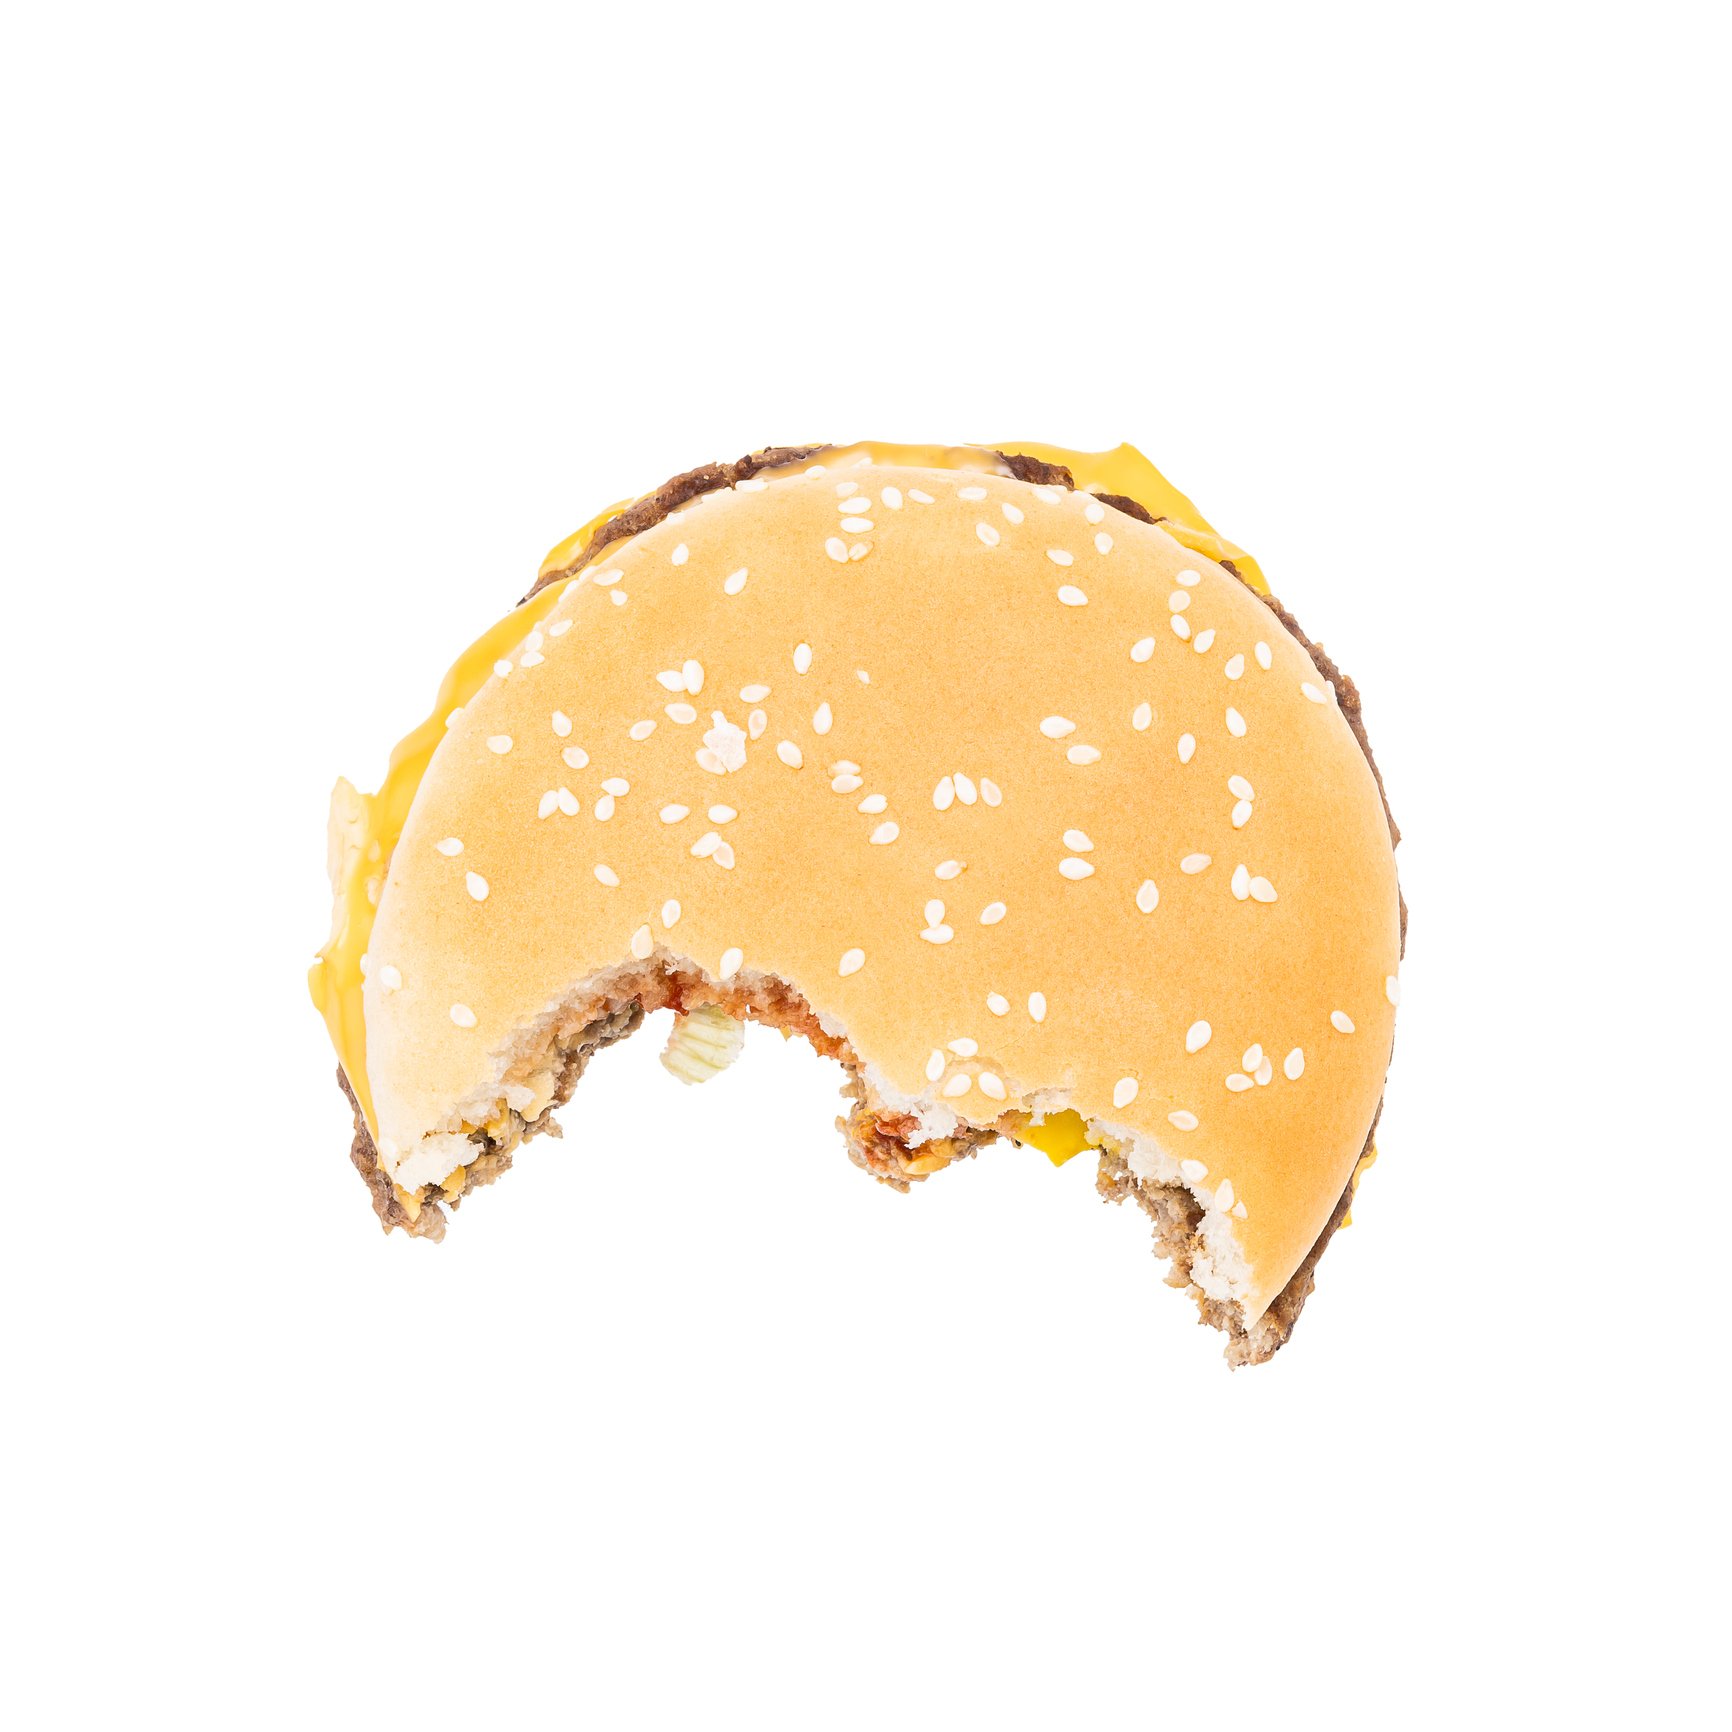 photo of a hamburger with bites taken out of it